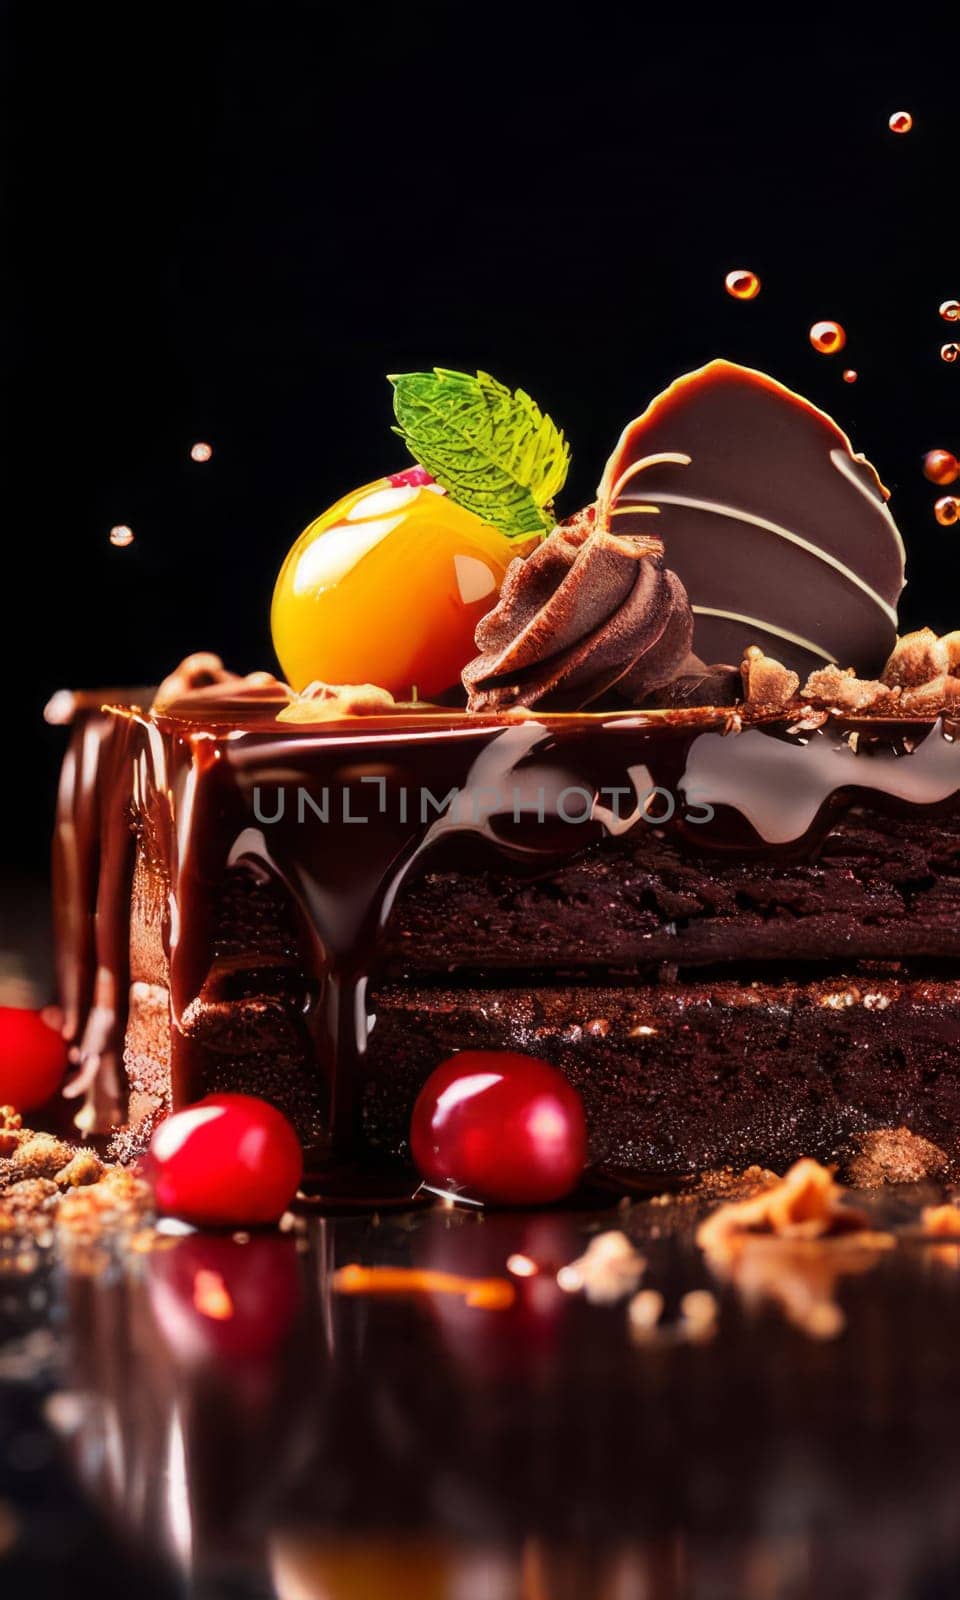 Decadent slice of chocolate cake topped with luscious cherries, drizzled with rich chocolate sauce. For dessert recipes, cafe, restaurant menu, culinary book, recipe website, culinary blog. by Angelsmoon